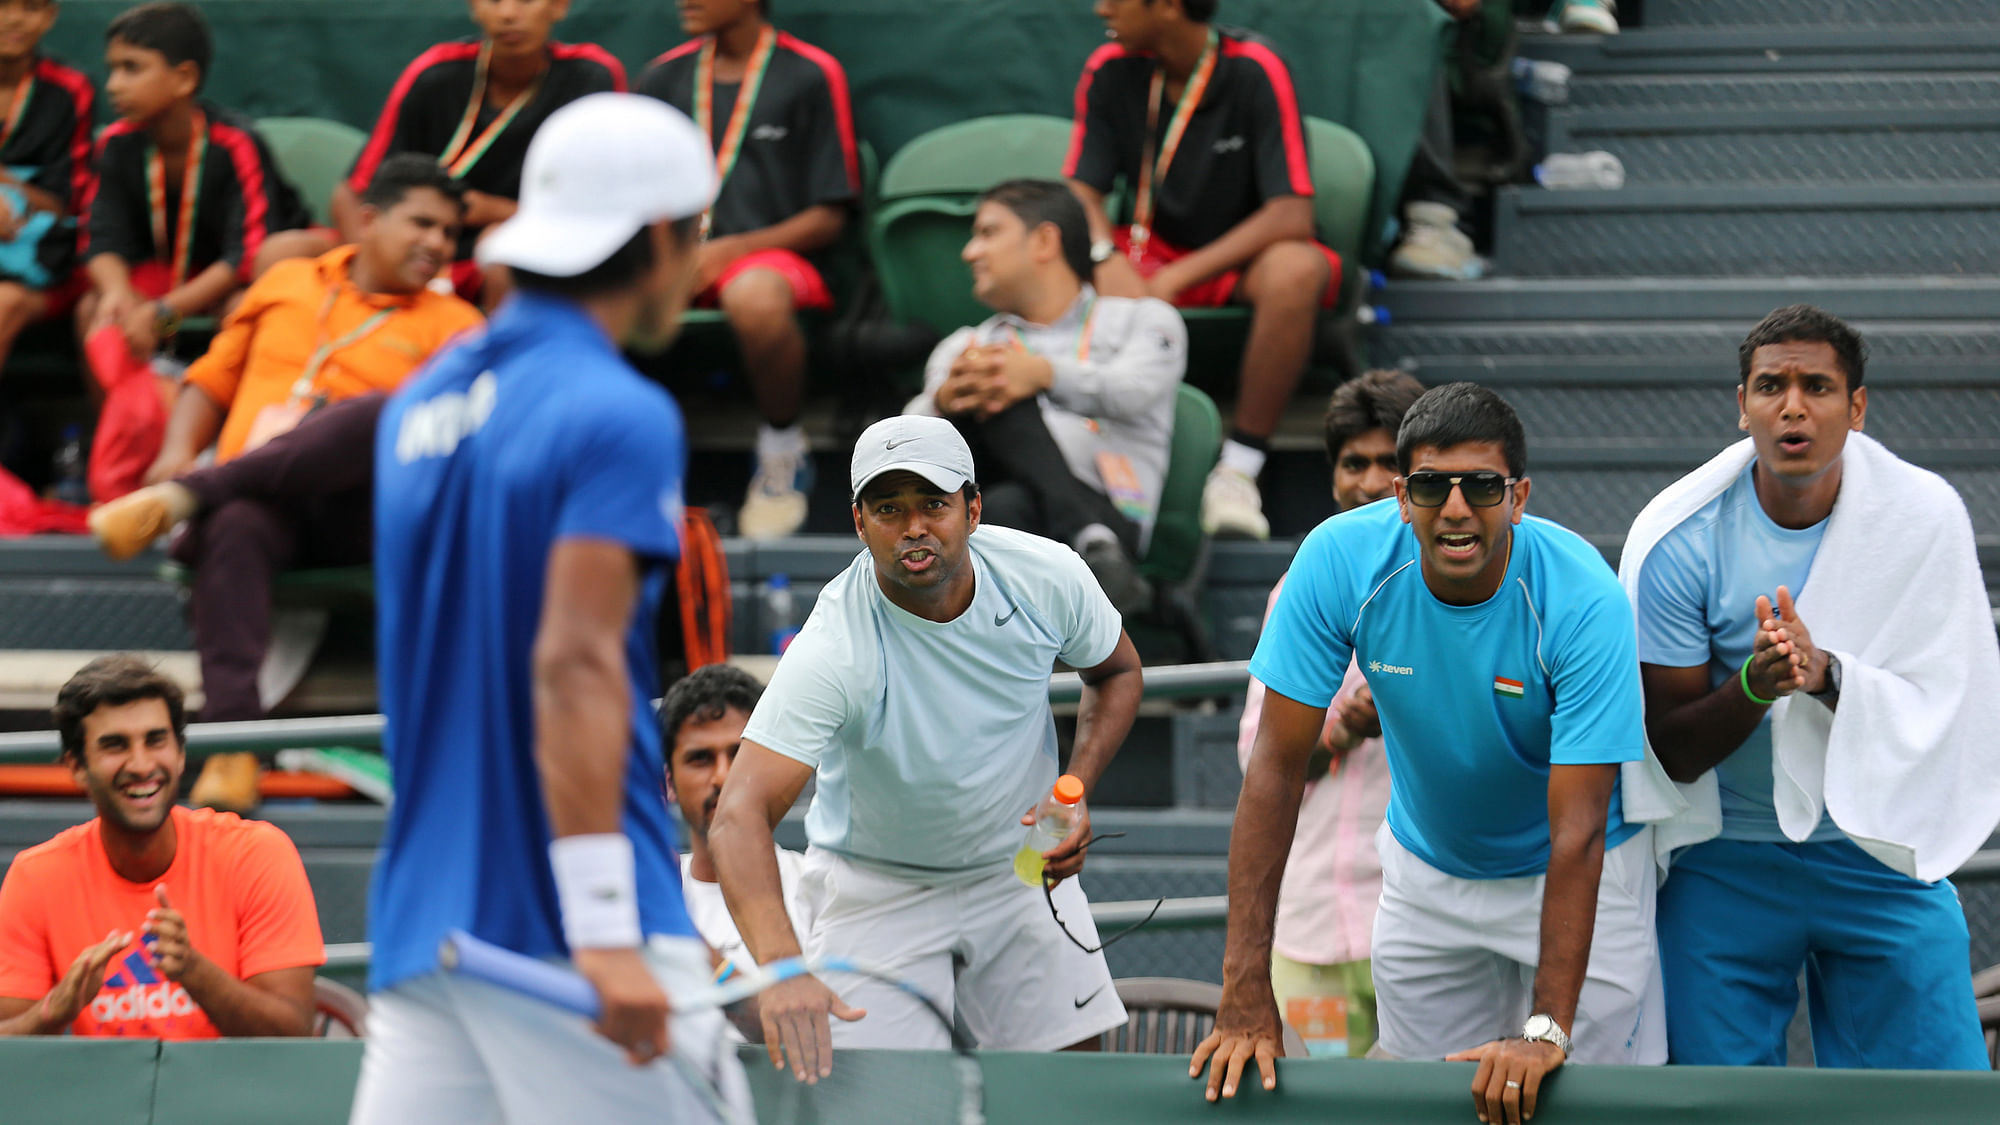 Leander Paes and the rest of the Indian Davis Cup team cheer for Somdev Devvarman after he won the match against&nbsp;Czech Republic’s Jiri Vesely. (Photo: PTI)